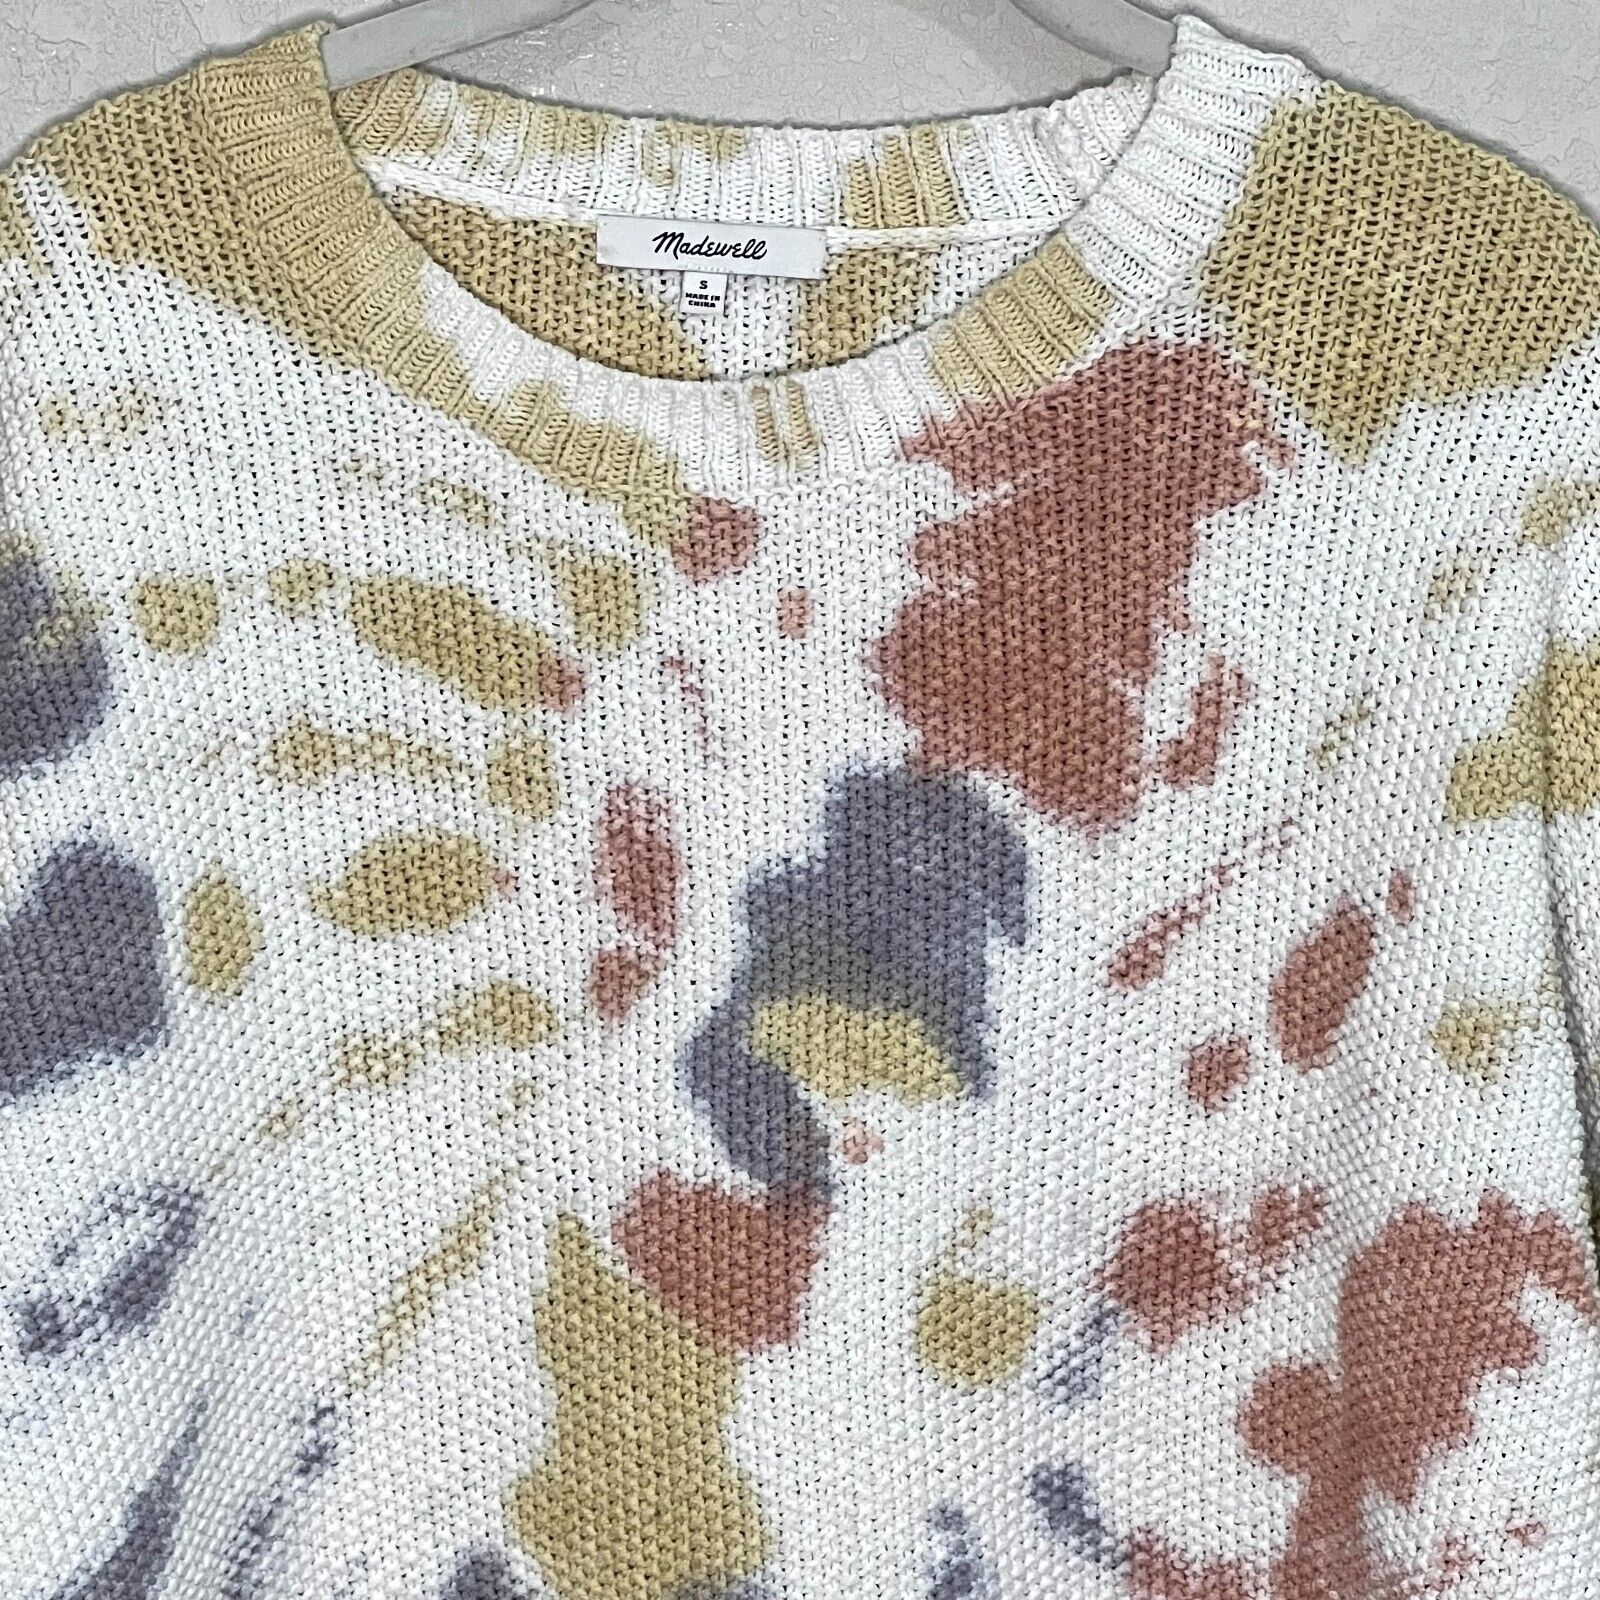 Madewell Tie-Dye Westford Pullover Sweater Size Small